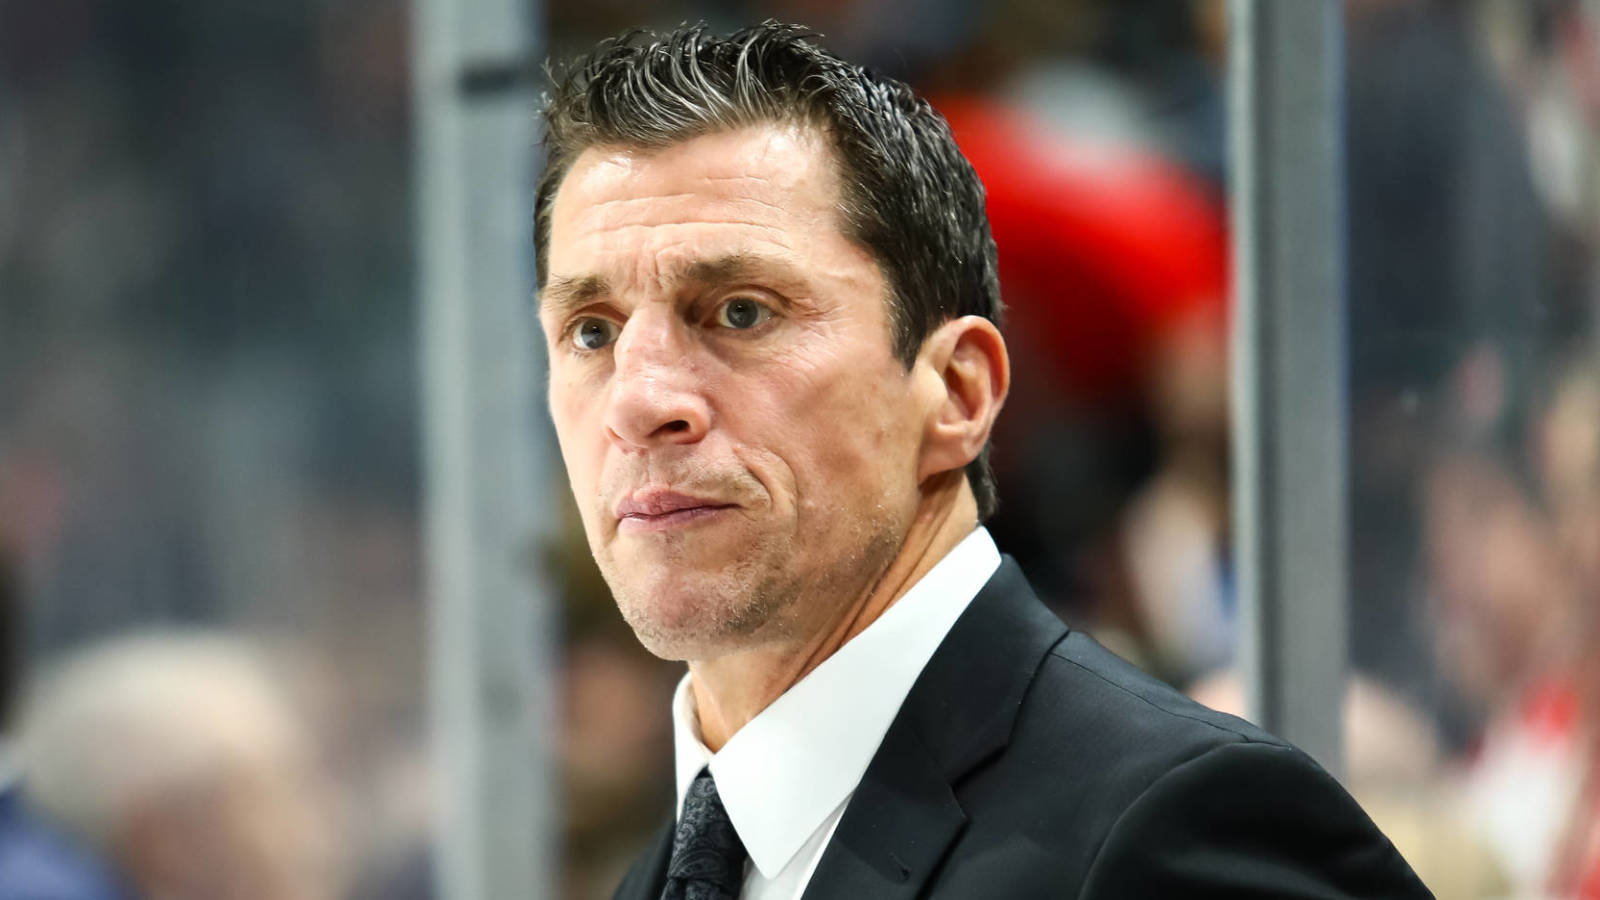 Hurricanes head coach Rod Brind'Amour 'moving on' after $25K fine from NHL  | Yardbarker